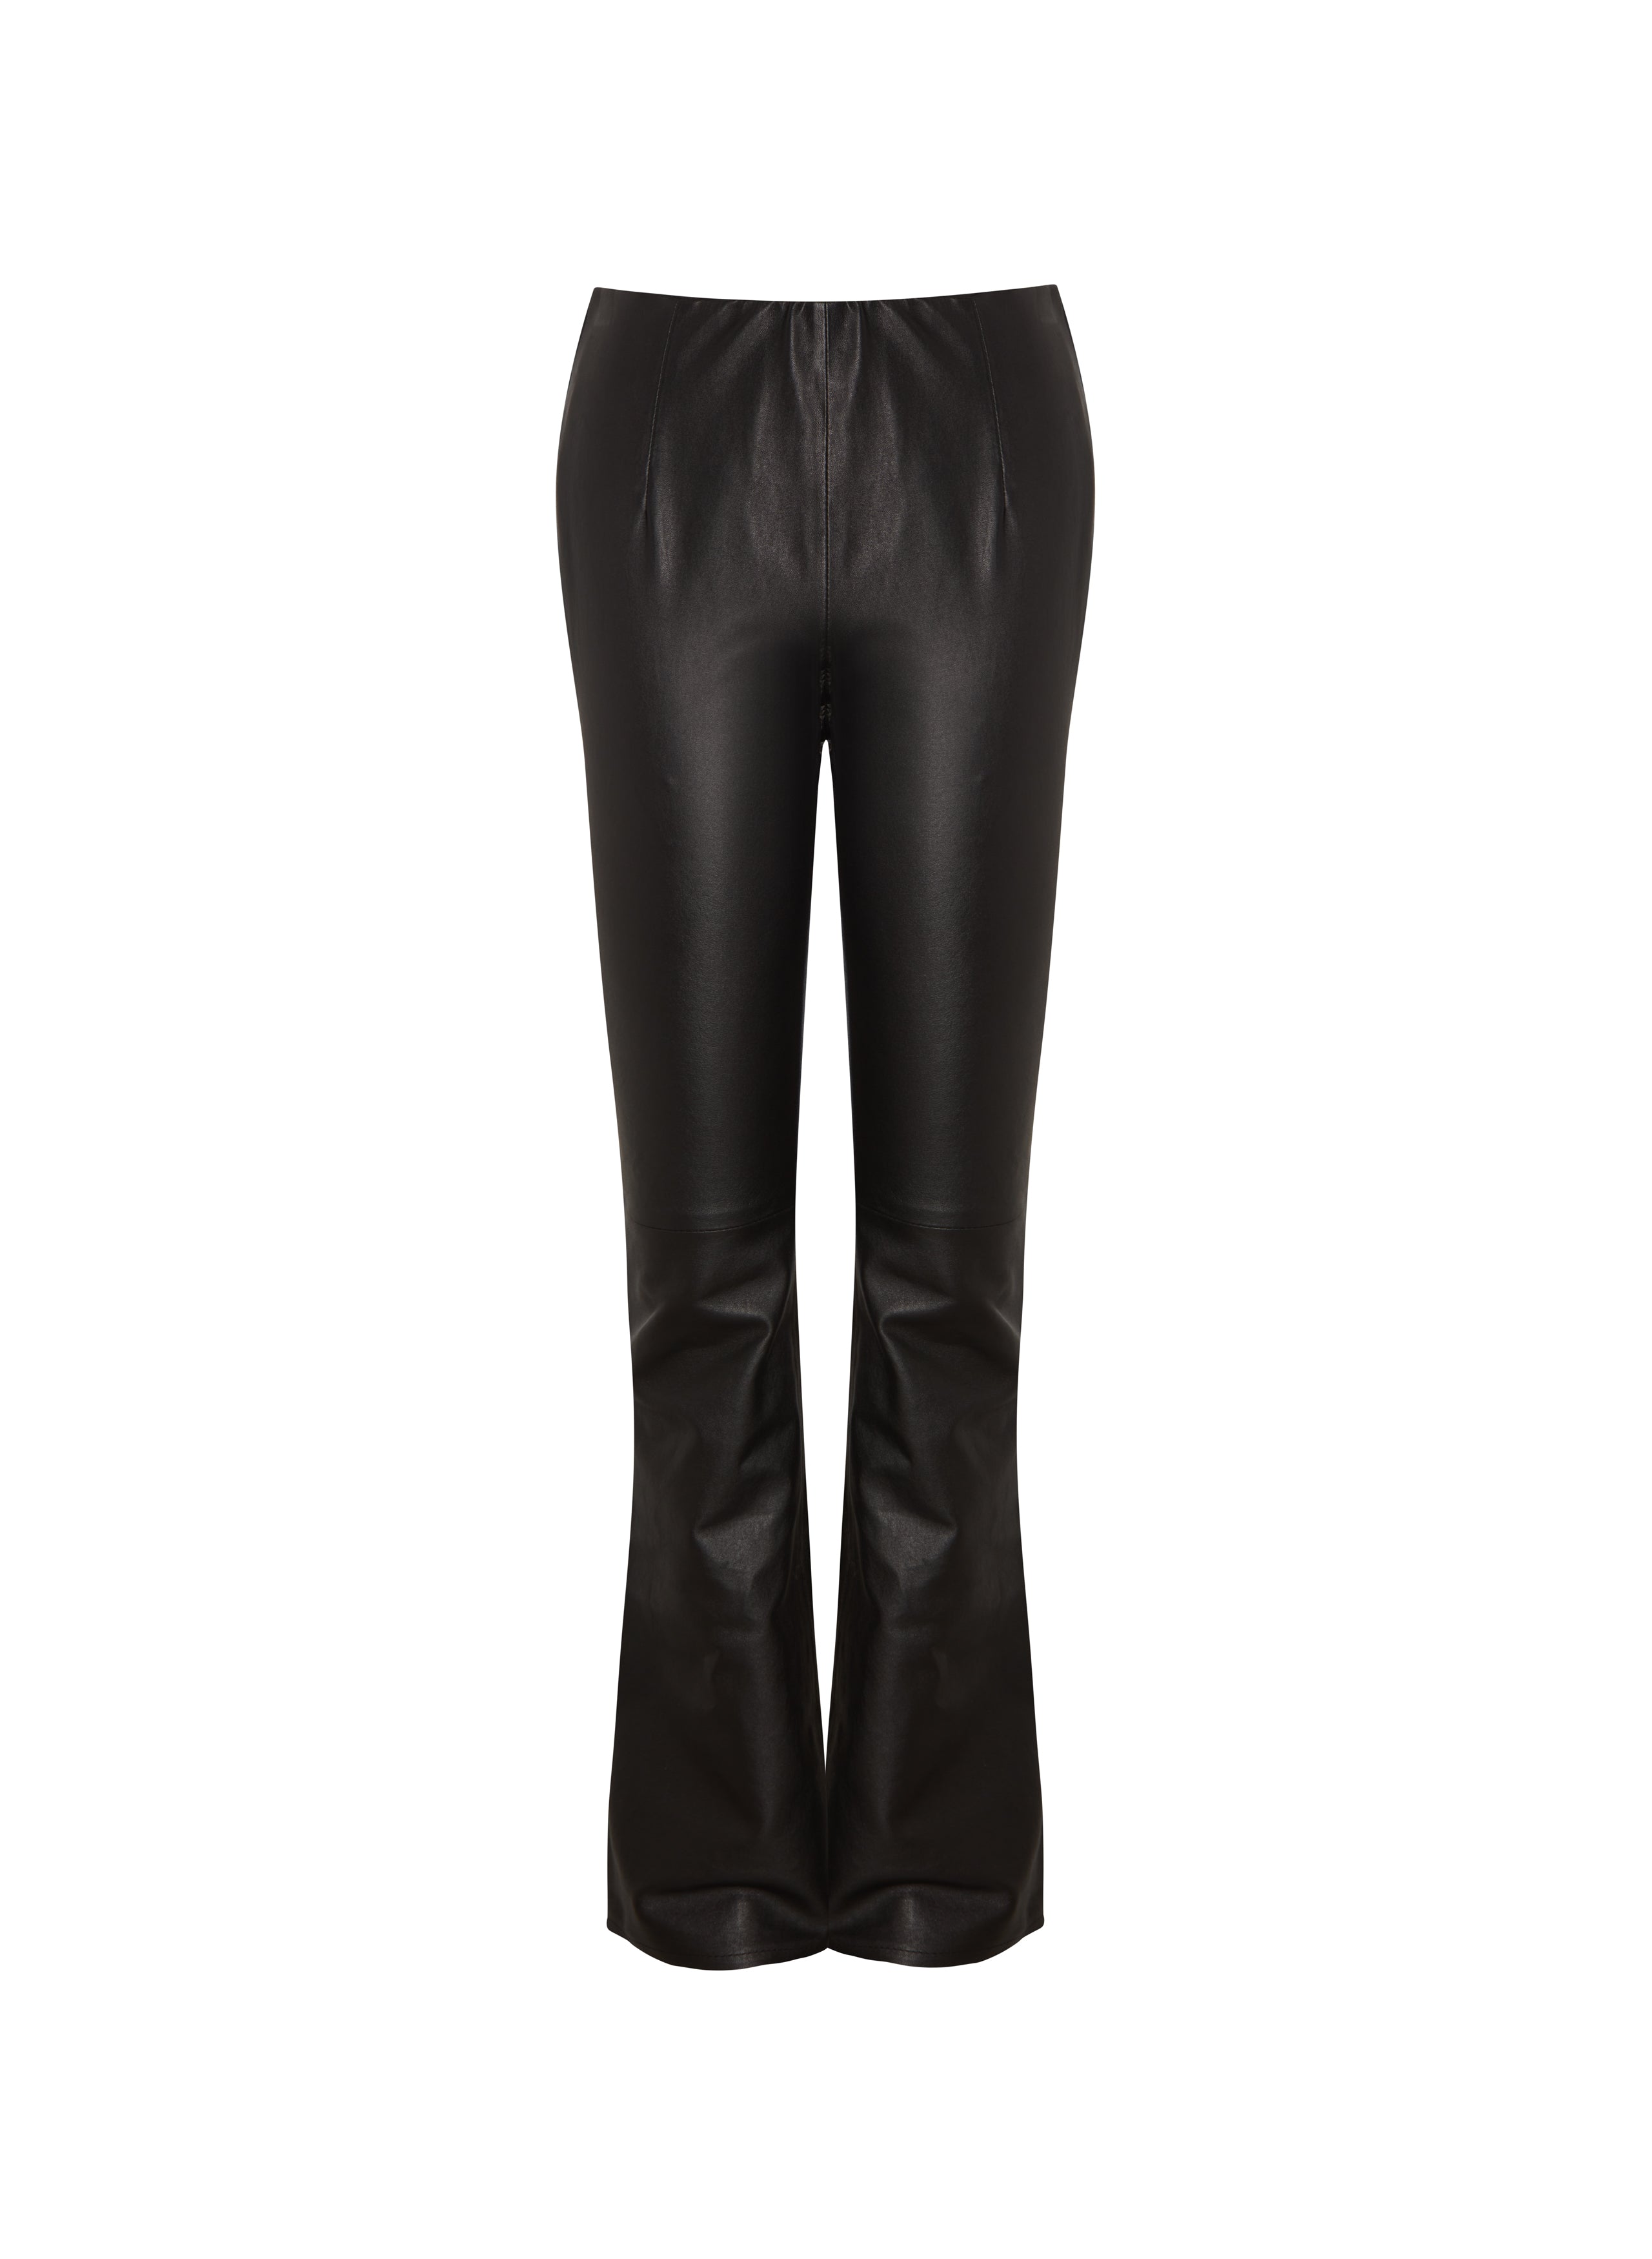 Vila leather look high waisted flared trousers in navy | ASOS